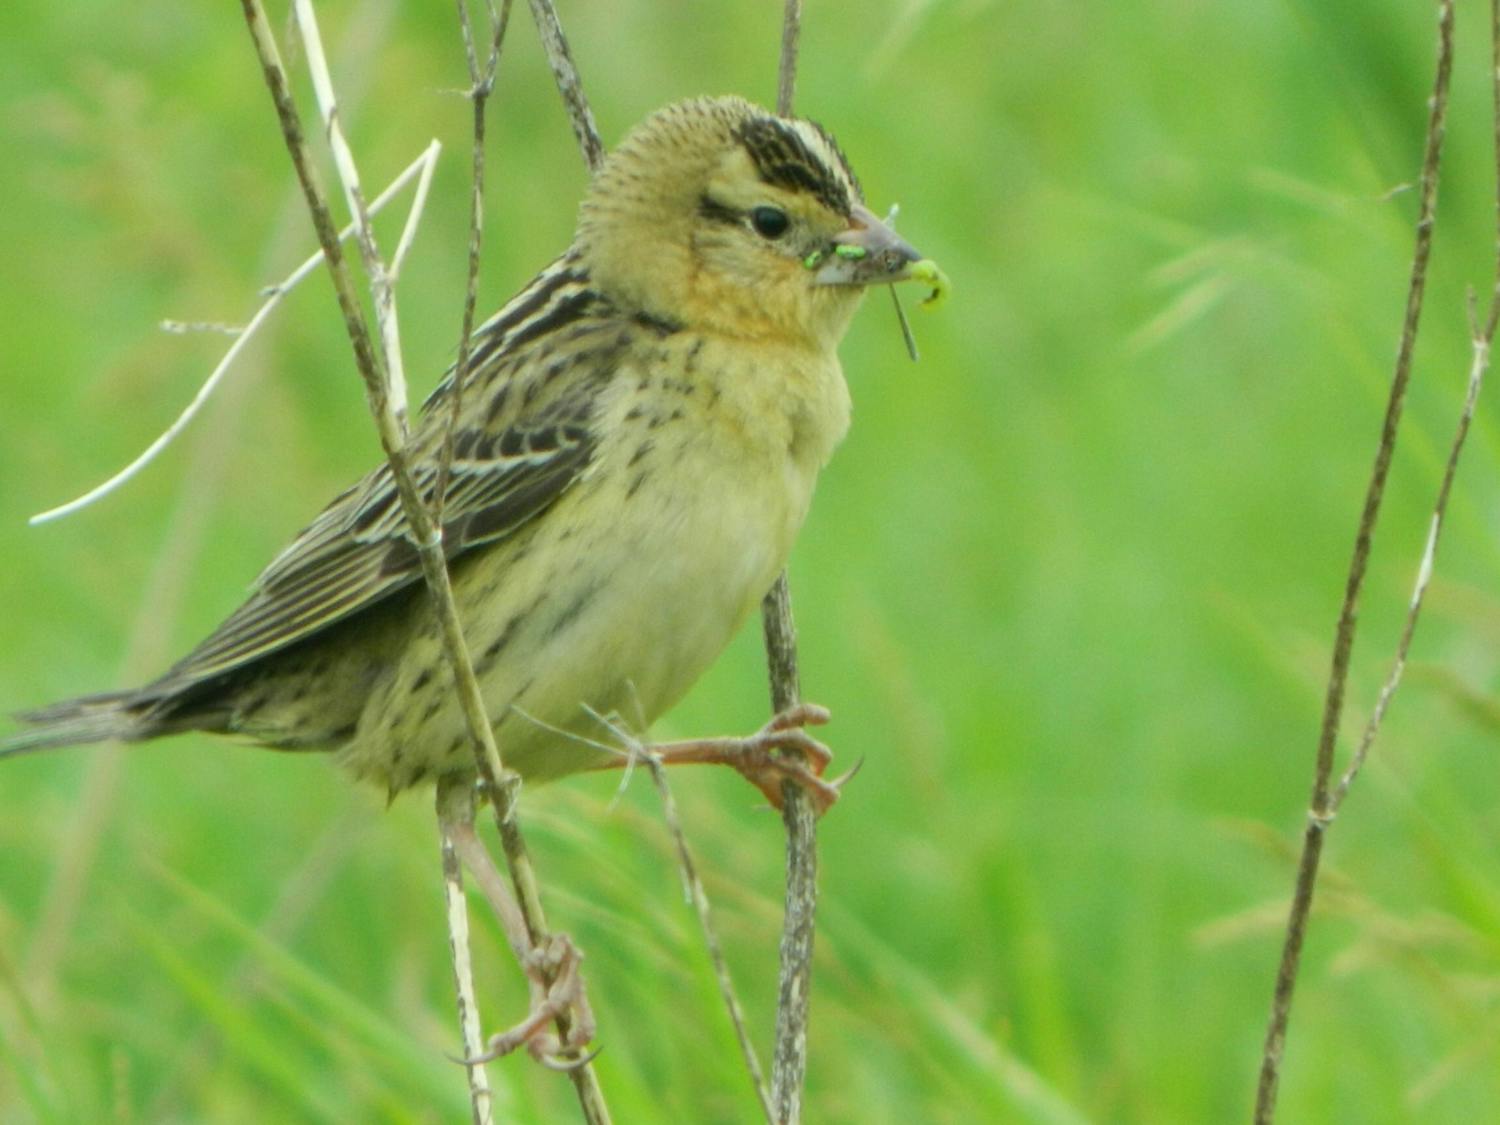 Photo of a Bobolink female bird with food in its mouth.